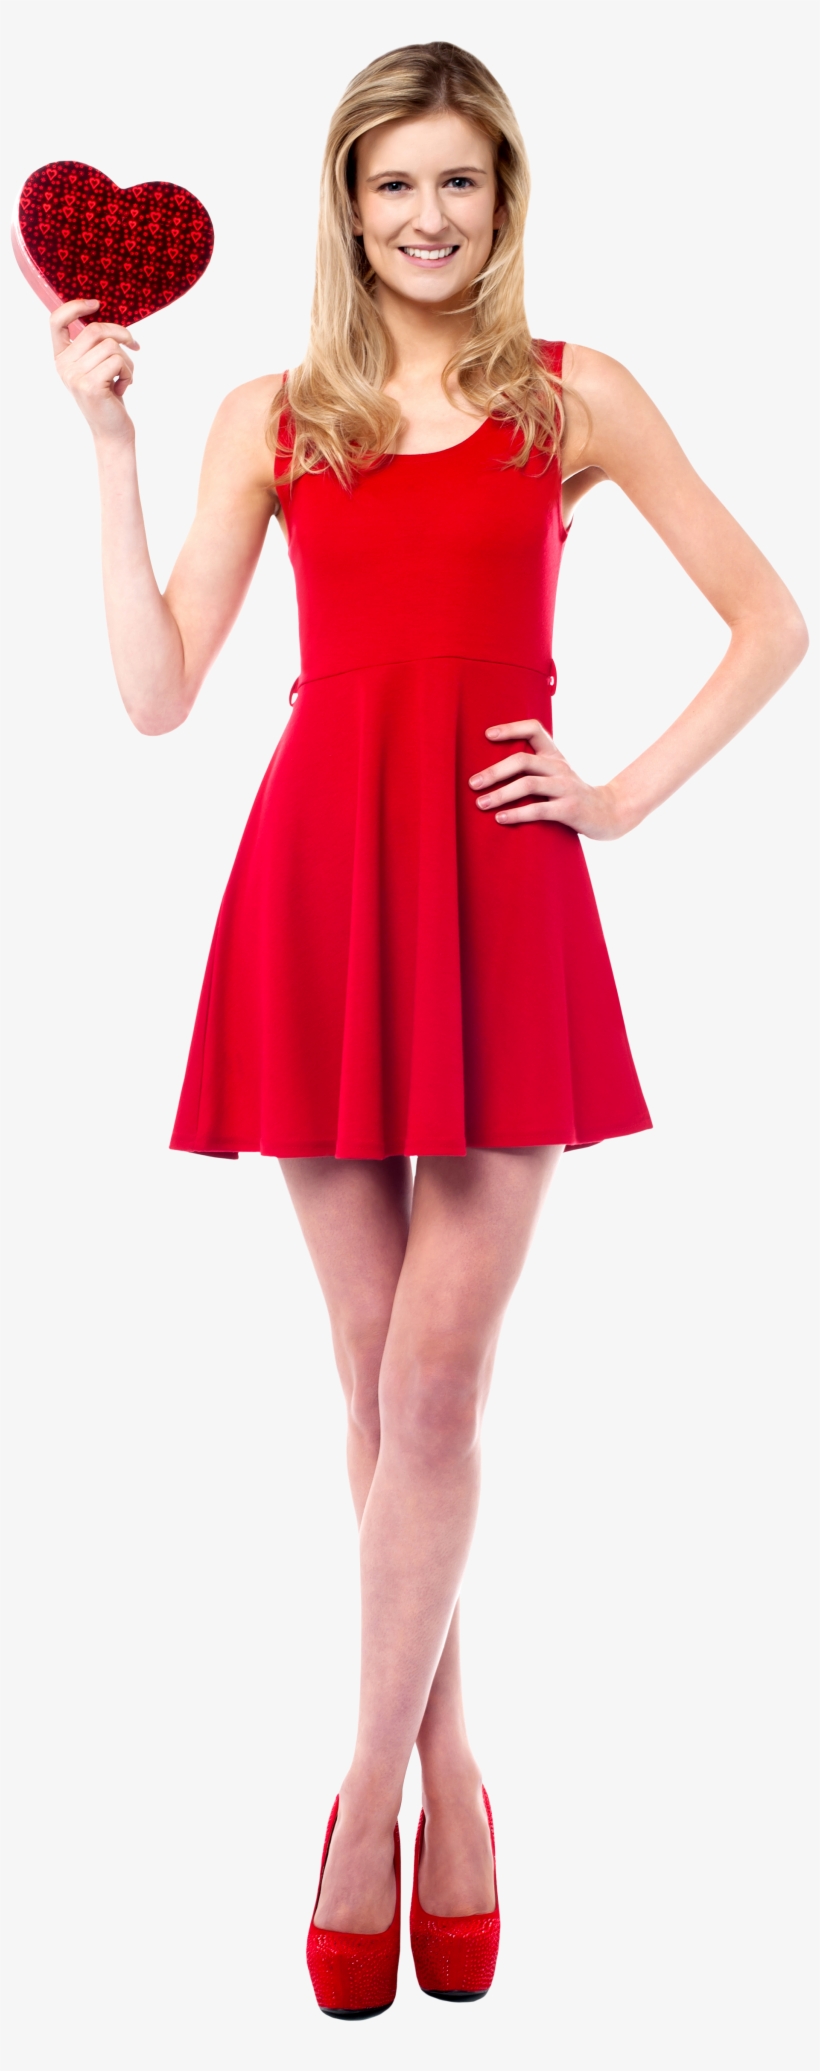 Valentines Day Girl Free Commercial Use Png Image, transparent png #275849